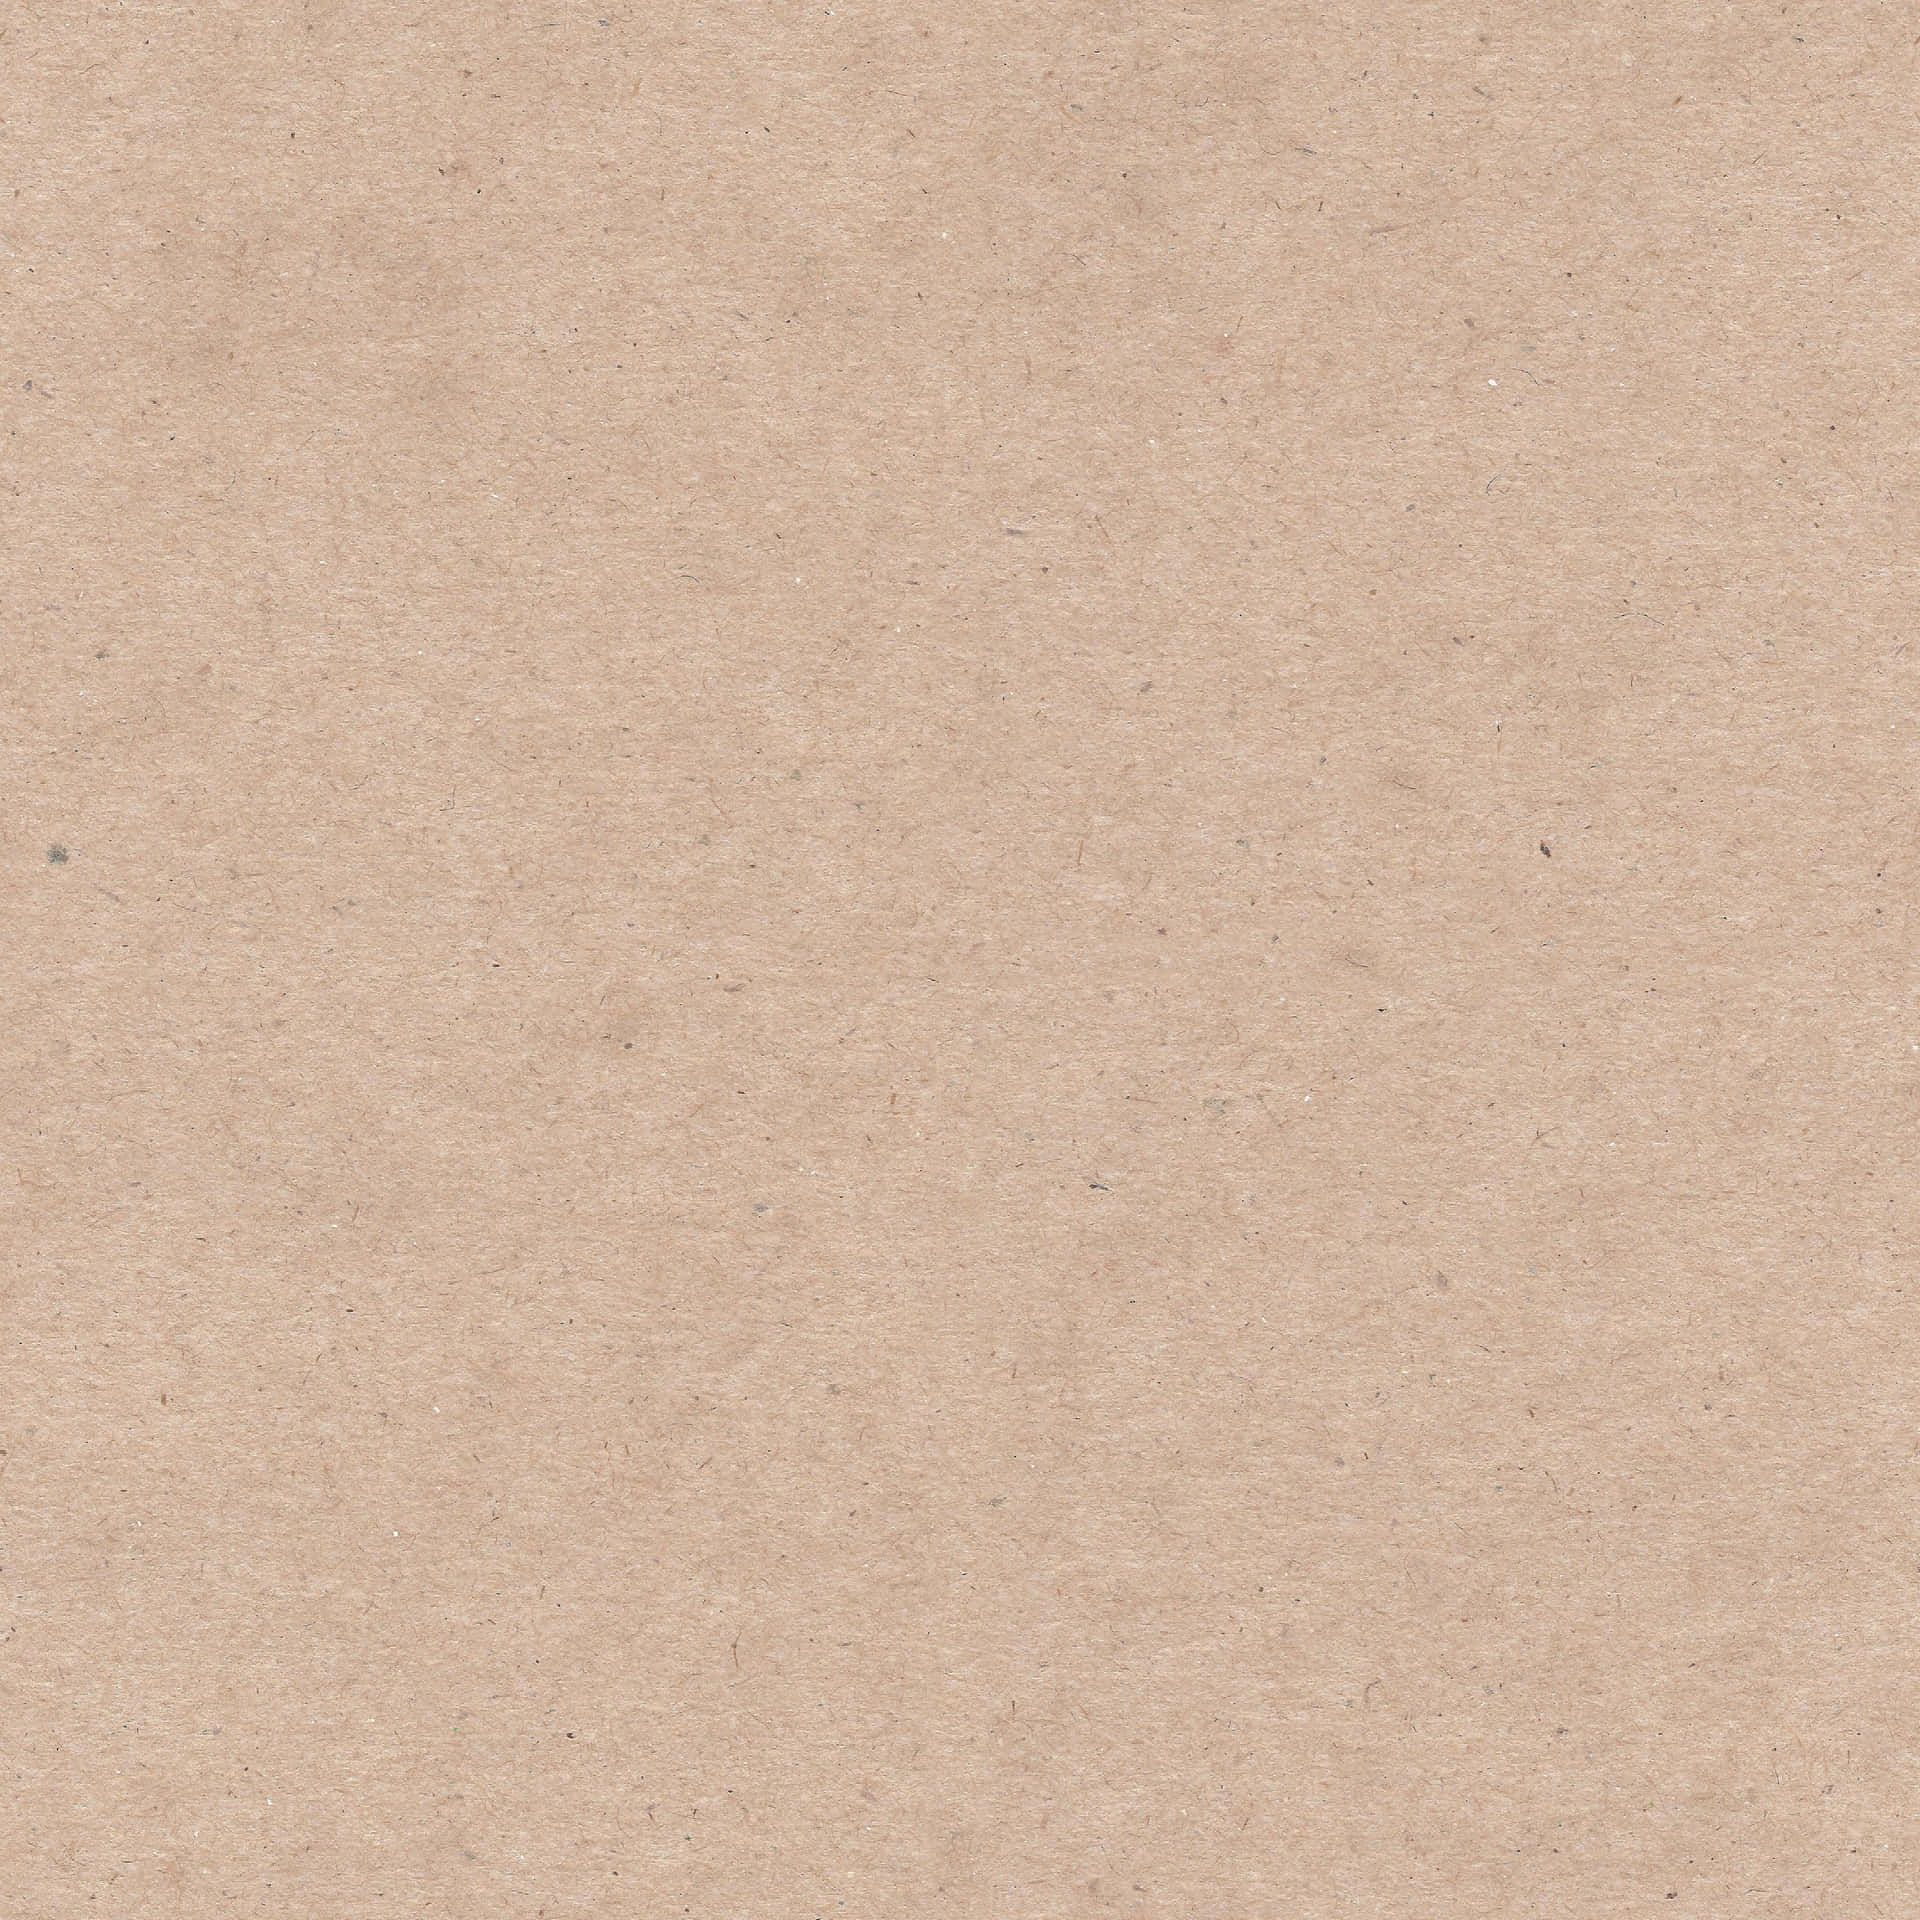 A Brown Paper Background With A Few Small Holes